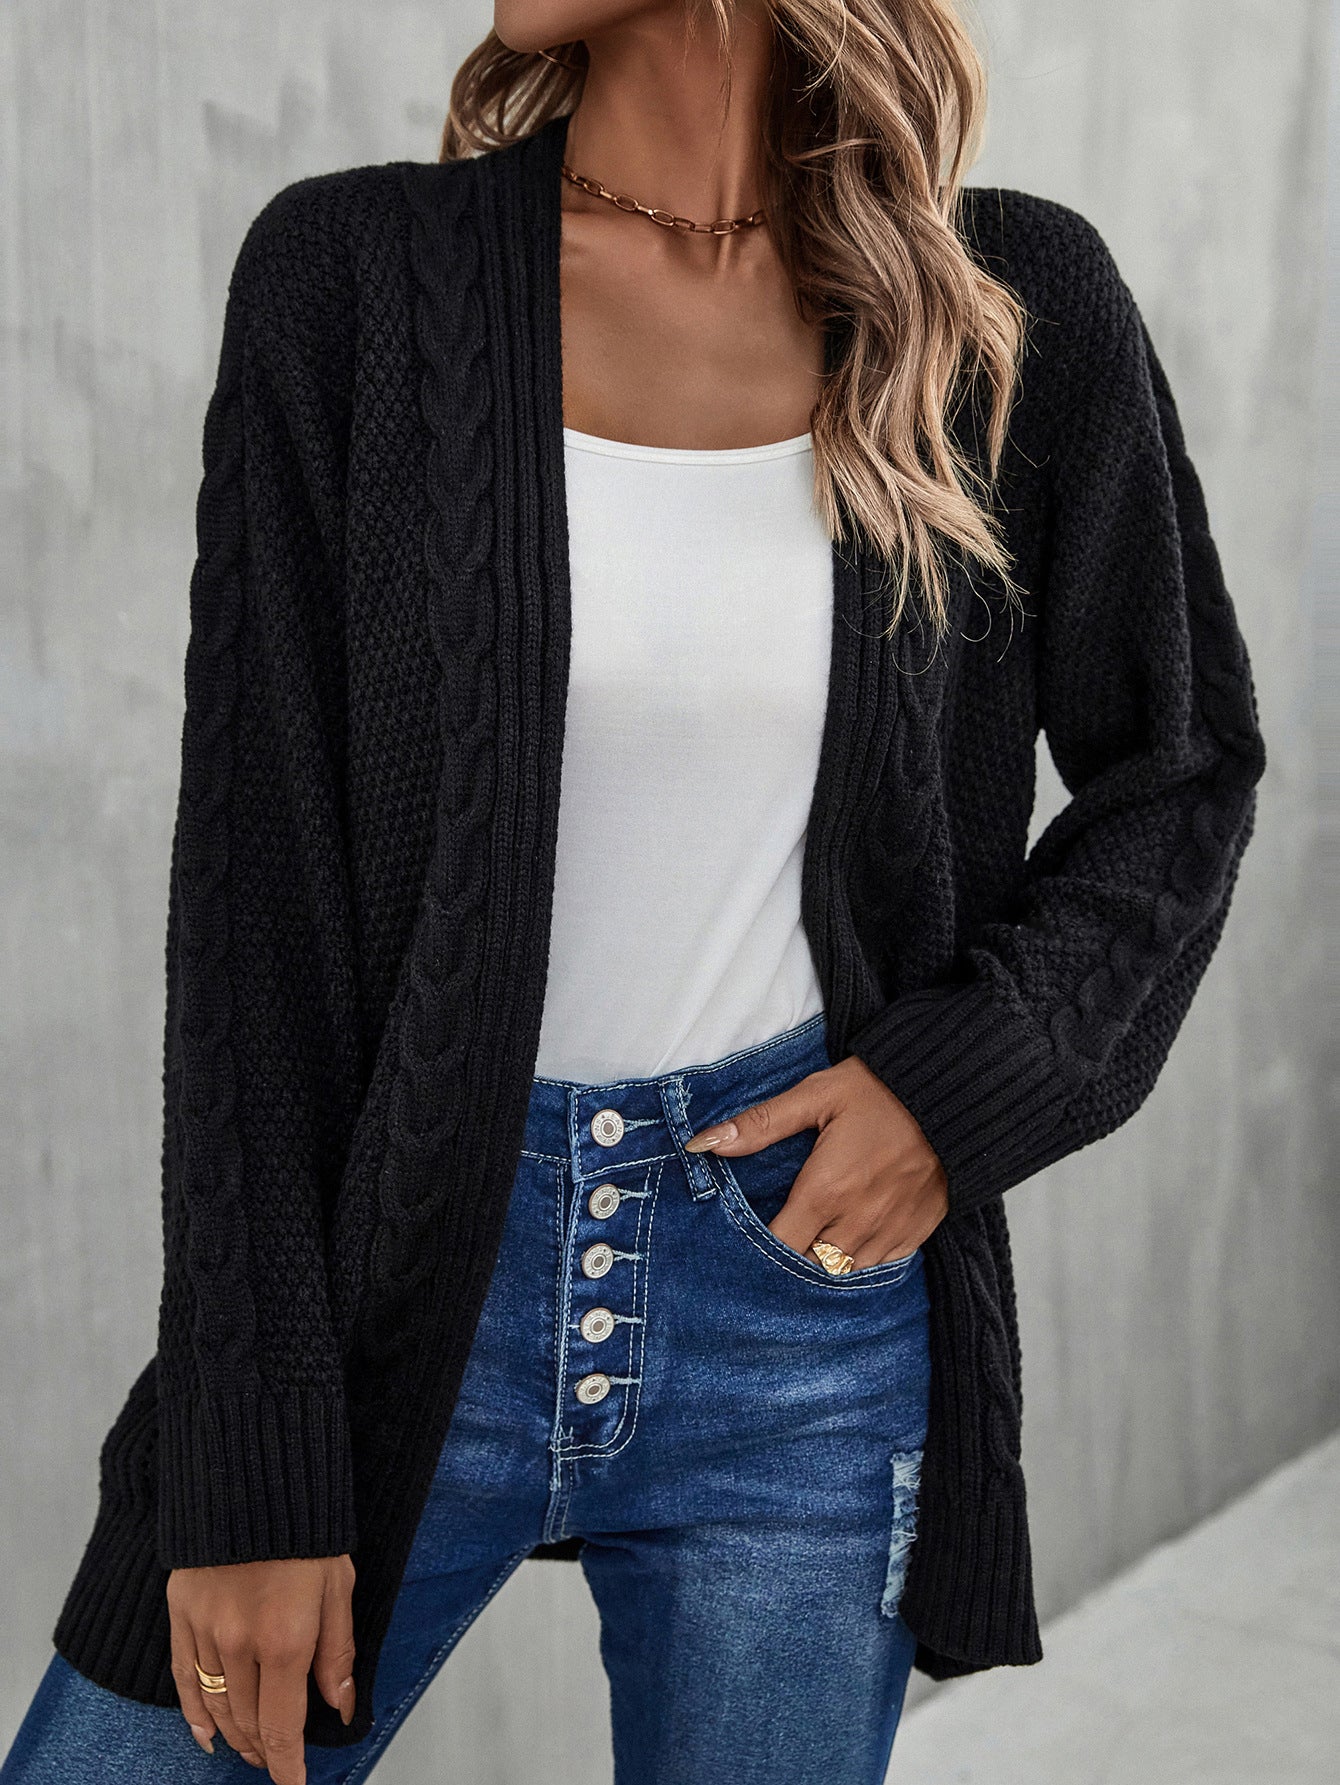 Autumn And Winter New Women's Cardigan Irregular Sweater Hollow Out Sweater Coat